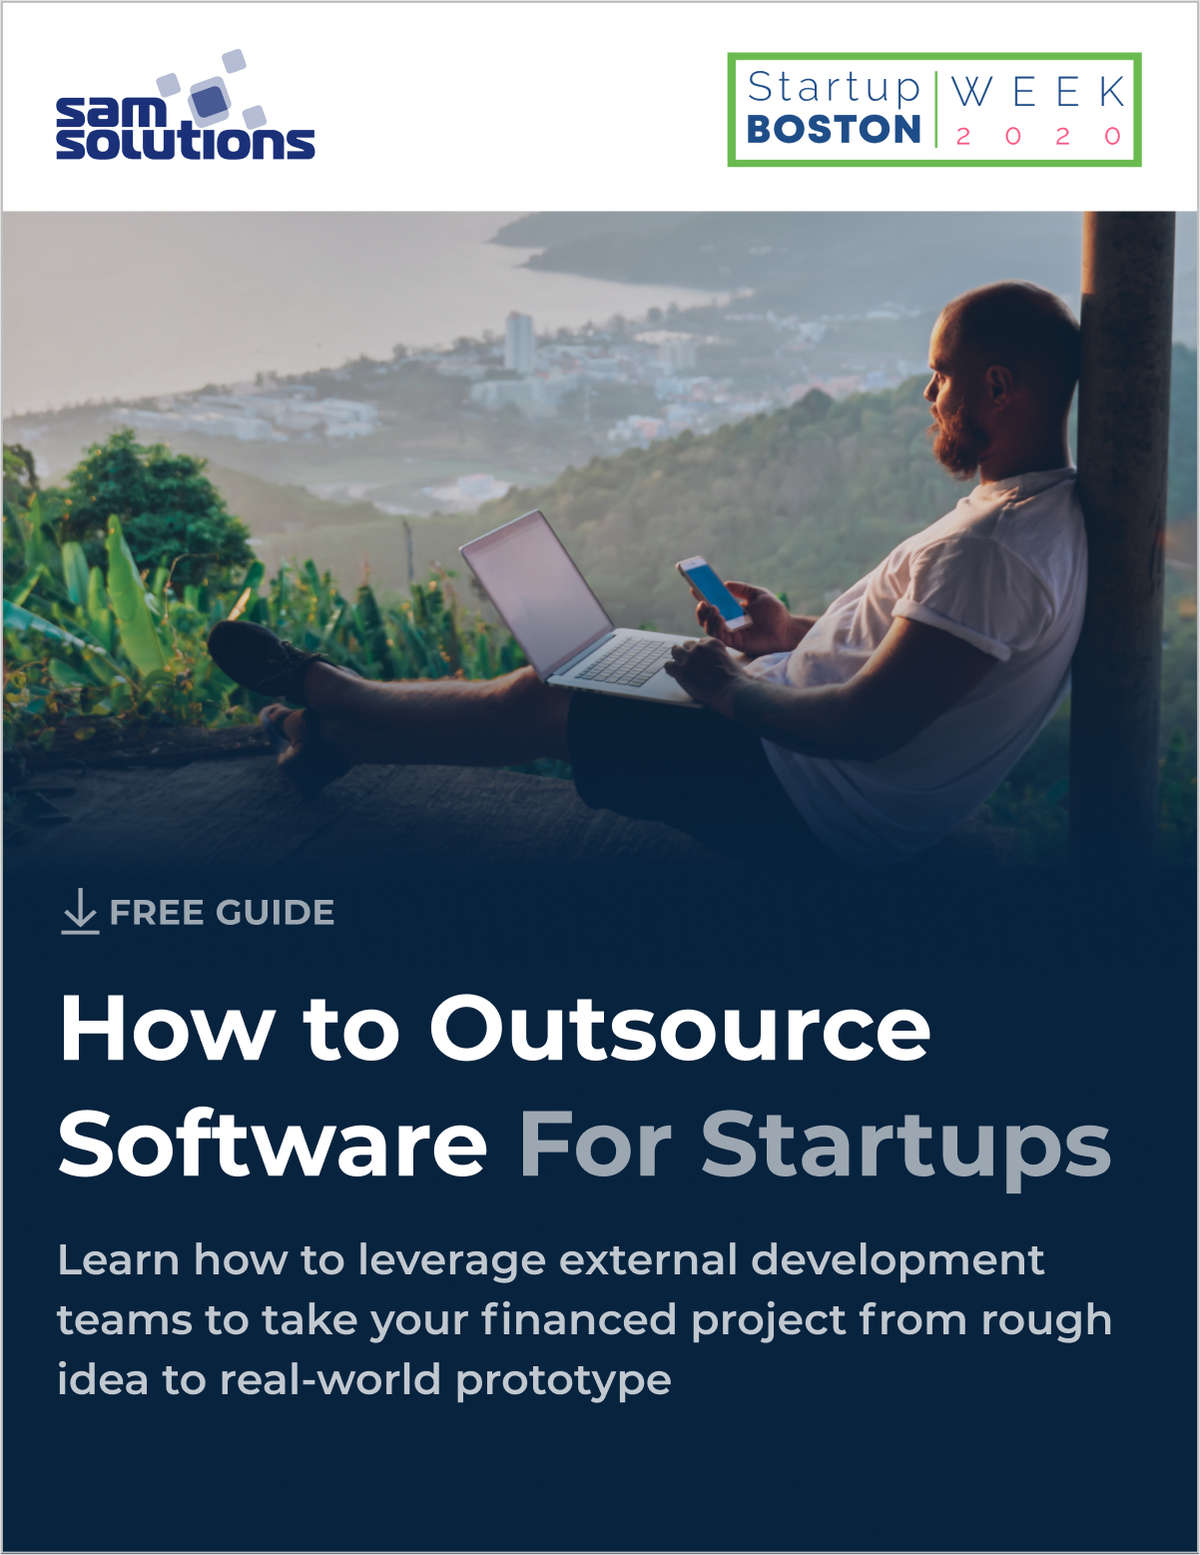 How to Outsource Software Development for Startups: 2020 Guide